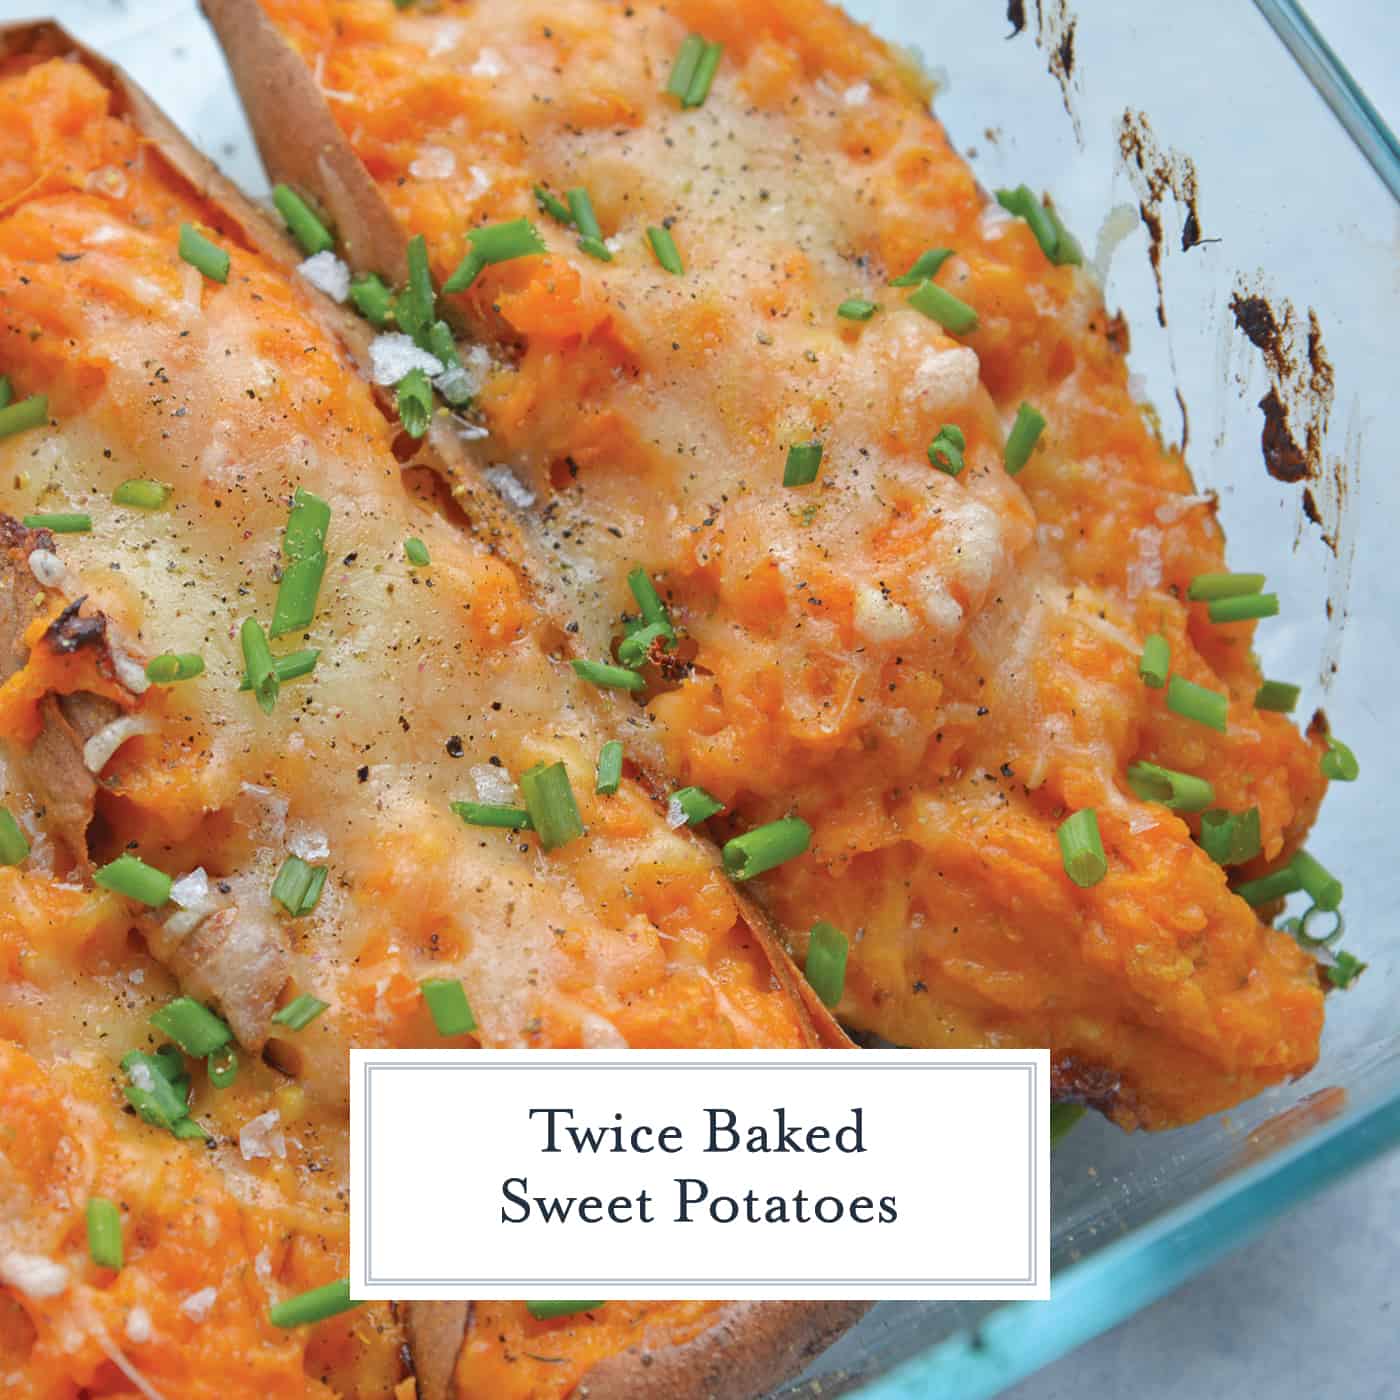 Twice Baked Sweet Potatoes take the deliciousness of whipped sweet potatoes and put them into their own little, serveable boats. #twicebakedpotatoes #sweetpotatoes www.savoryexperiments.com